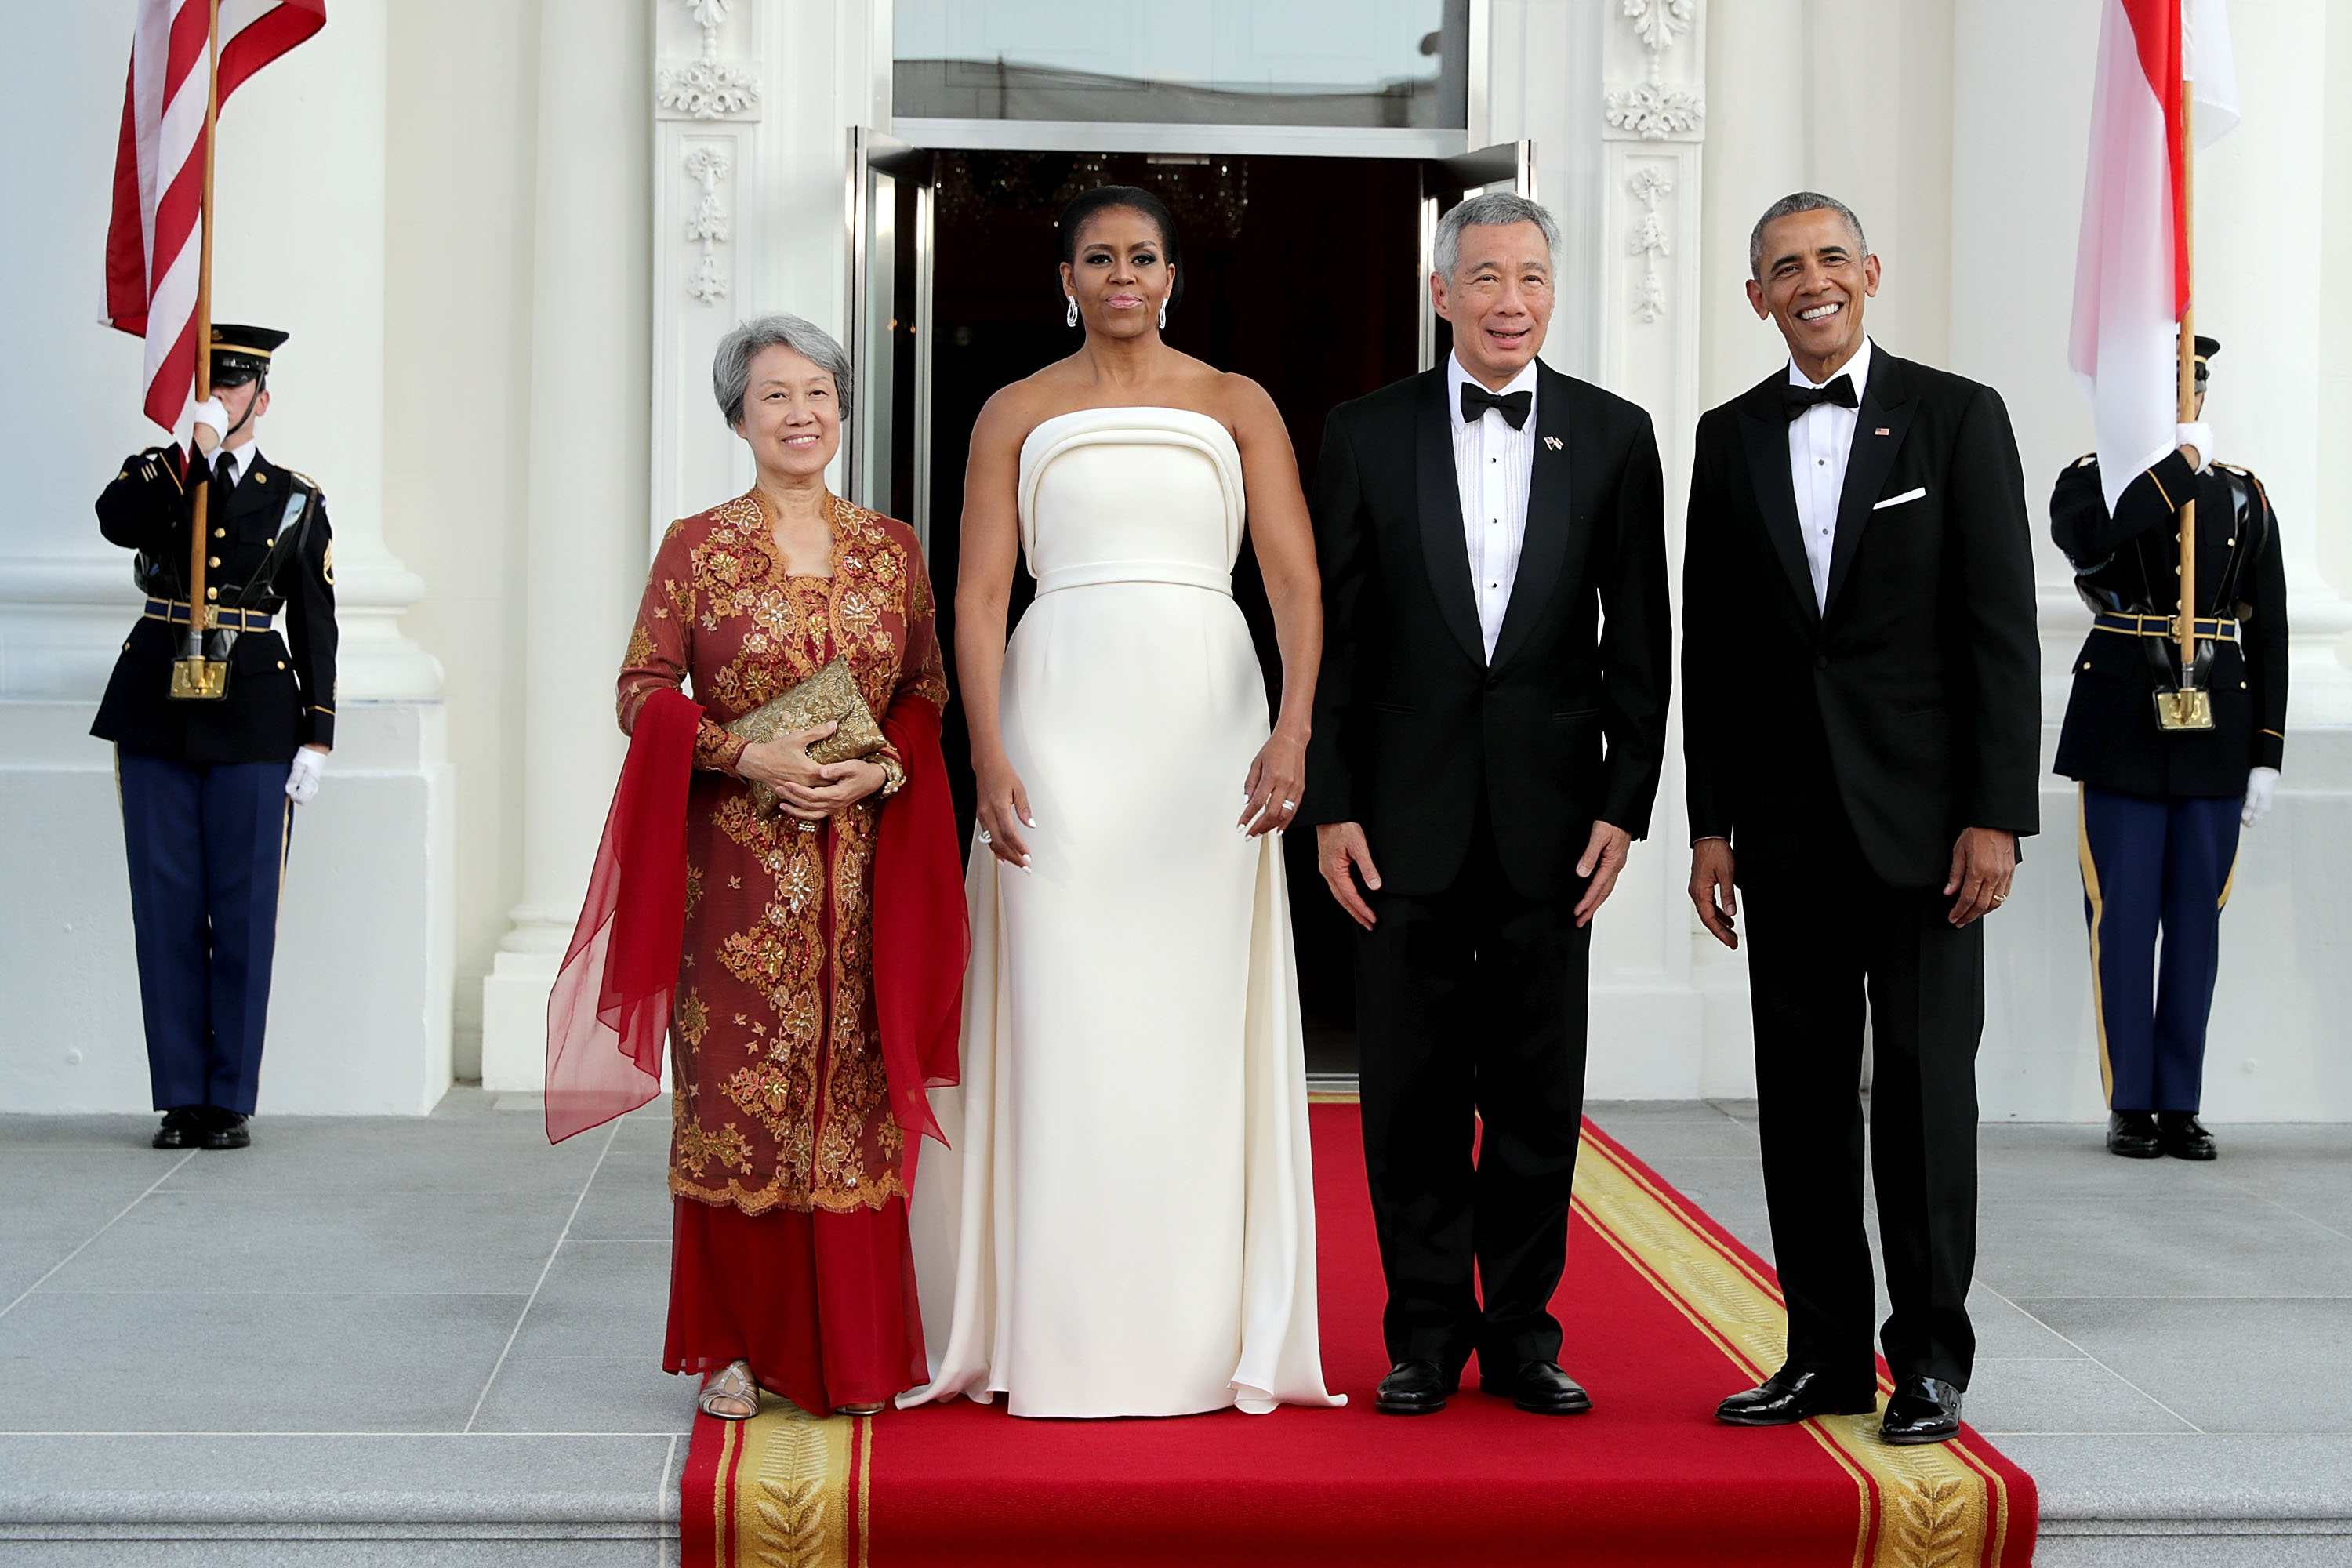 WASHINGTON, DC - AUGUST 02:  (L-R) Ho Ching, first lady Michelle Obama, Prime Minister Lee Hsien Loong of Singapore and U.S. President Barack Obama pose for photographs in the North Portico of the White House August 2, 2016 in Washington, DC. The Obamas are hosting the prime minister and his wife for an official state dinner.  (Photo by Chip Somodevilla/Getty Images)